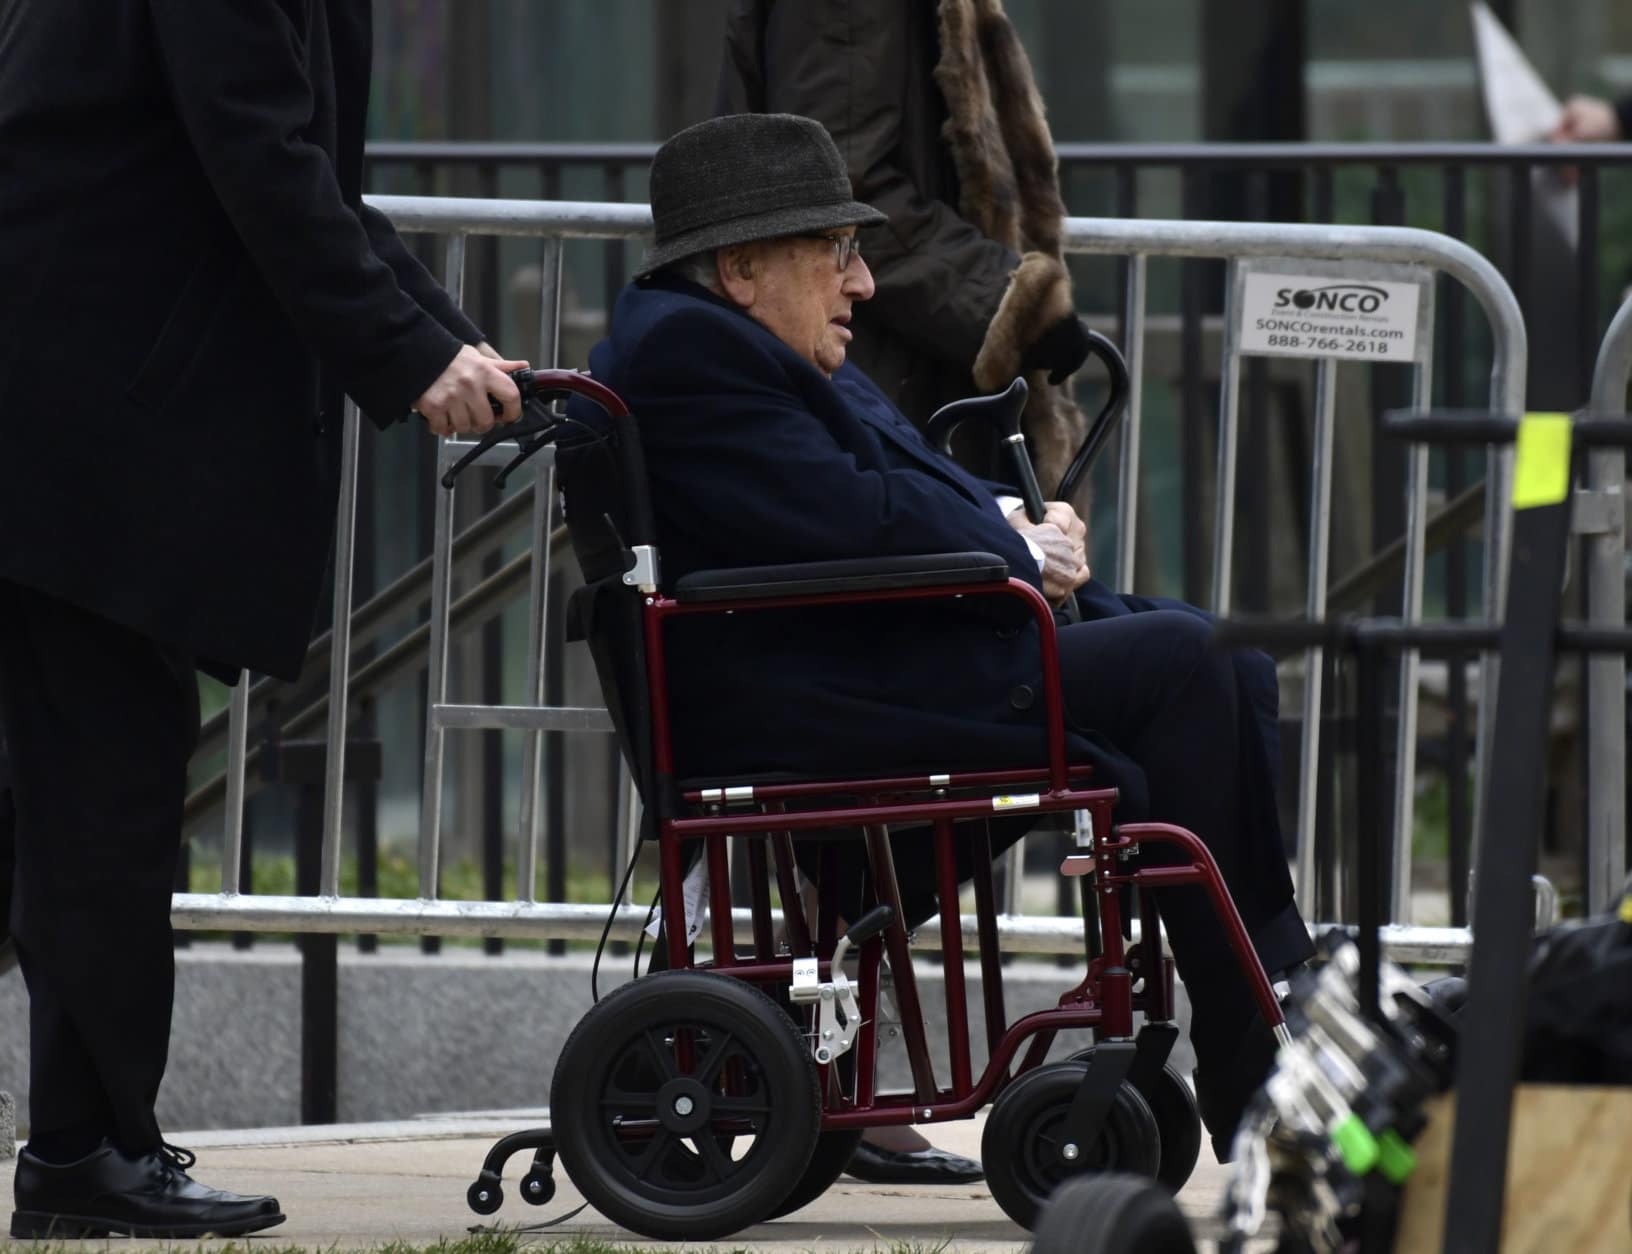 Former Secretary of State Henry Kissinger arrives for the State Funeral of former President George H.W. Bush at the National Cathedral in Washington, Wednesday, Dec. 5, 2018. (AP Photo/Susan Walsh)